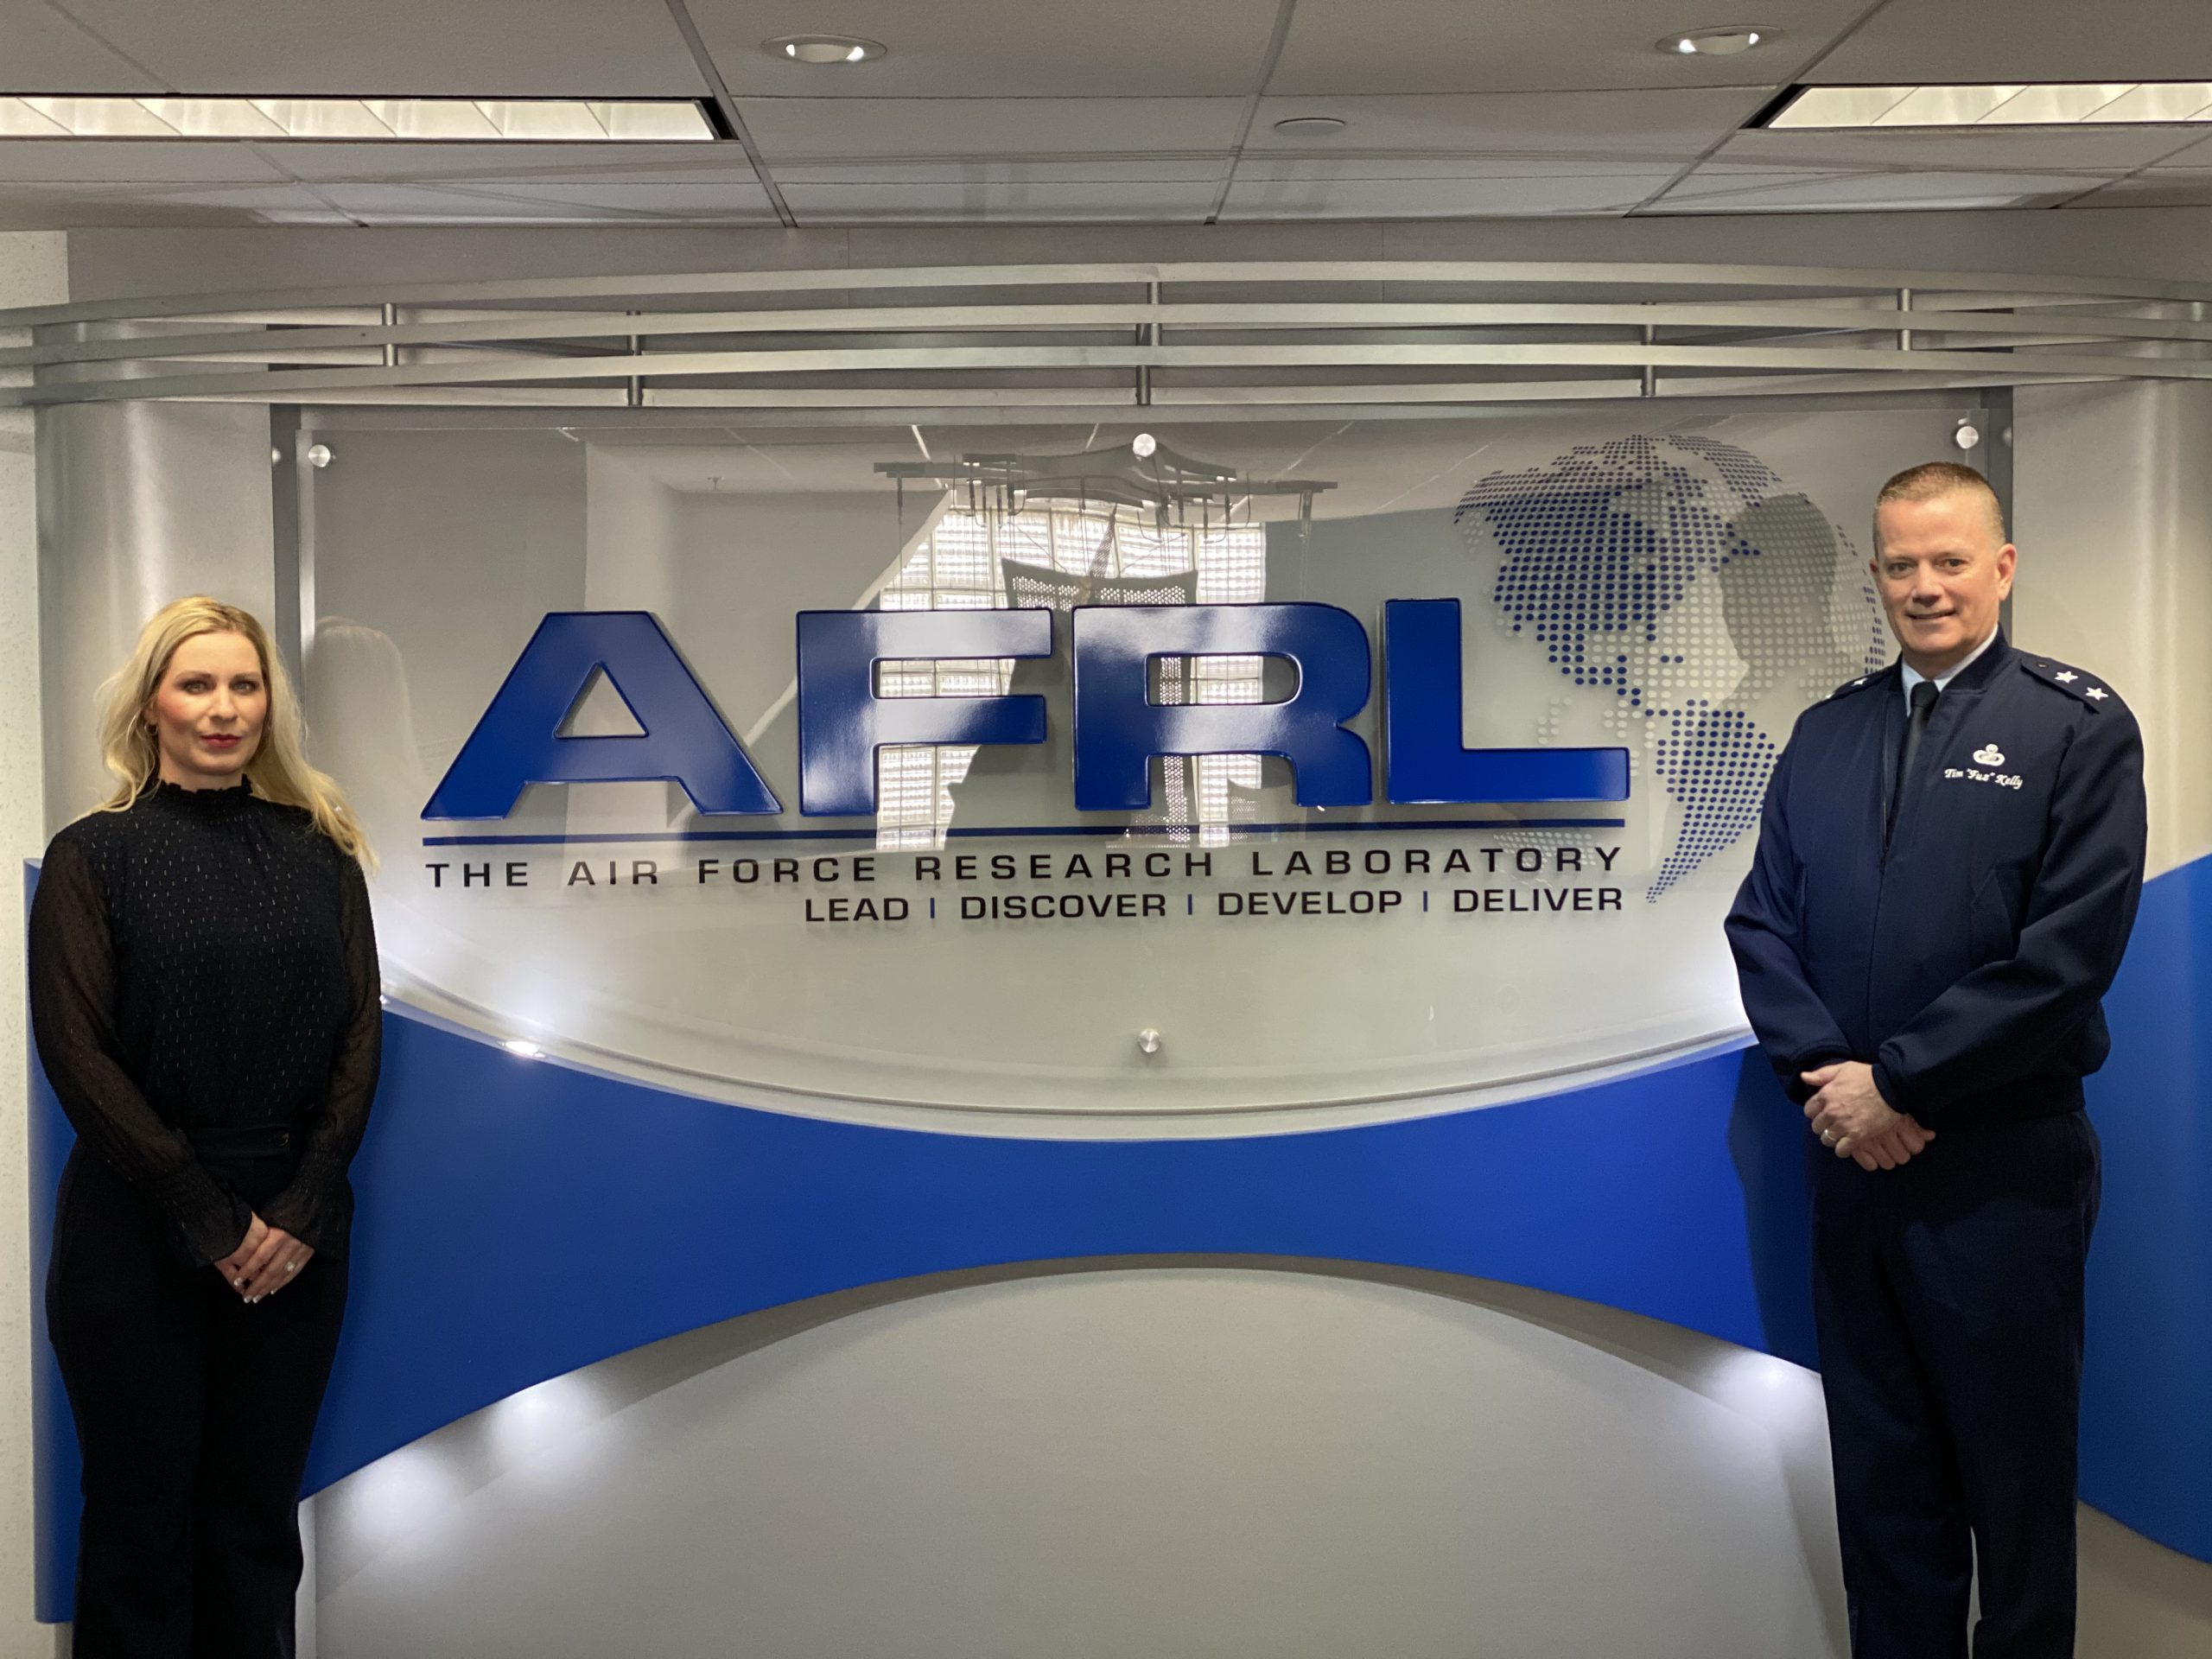 Two podcast speakers in front of AFRL signage